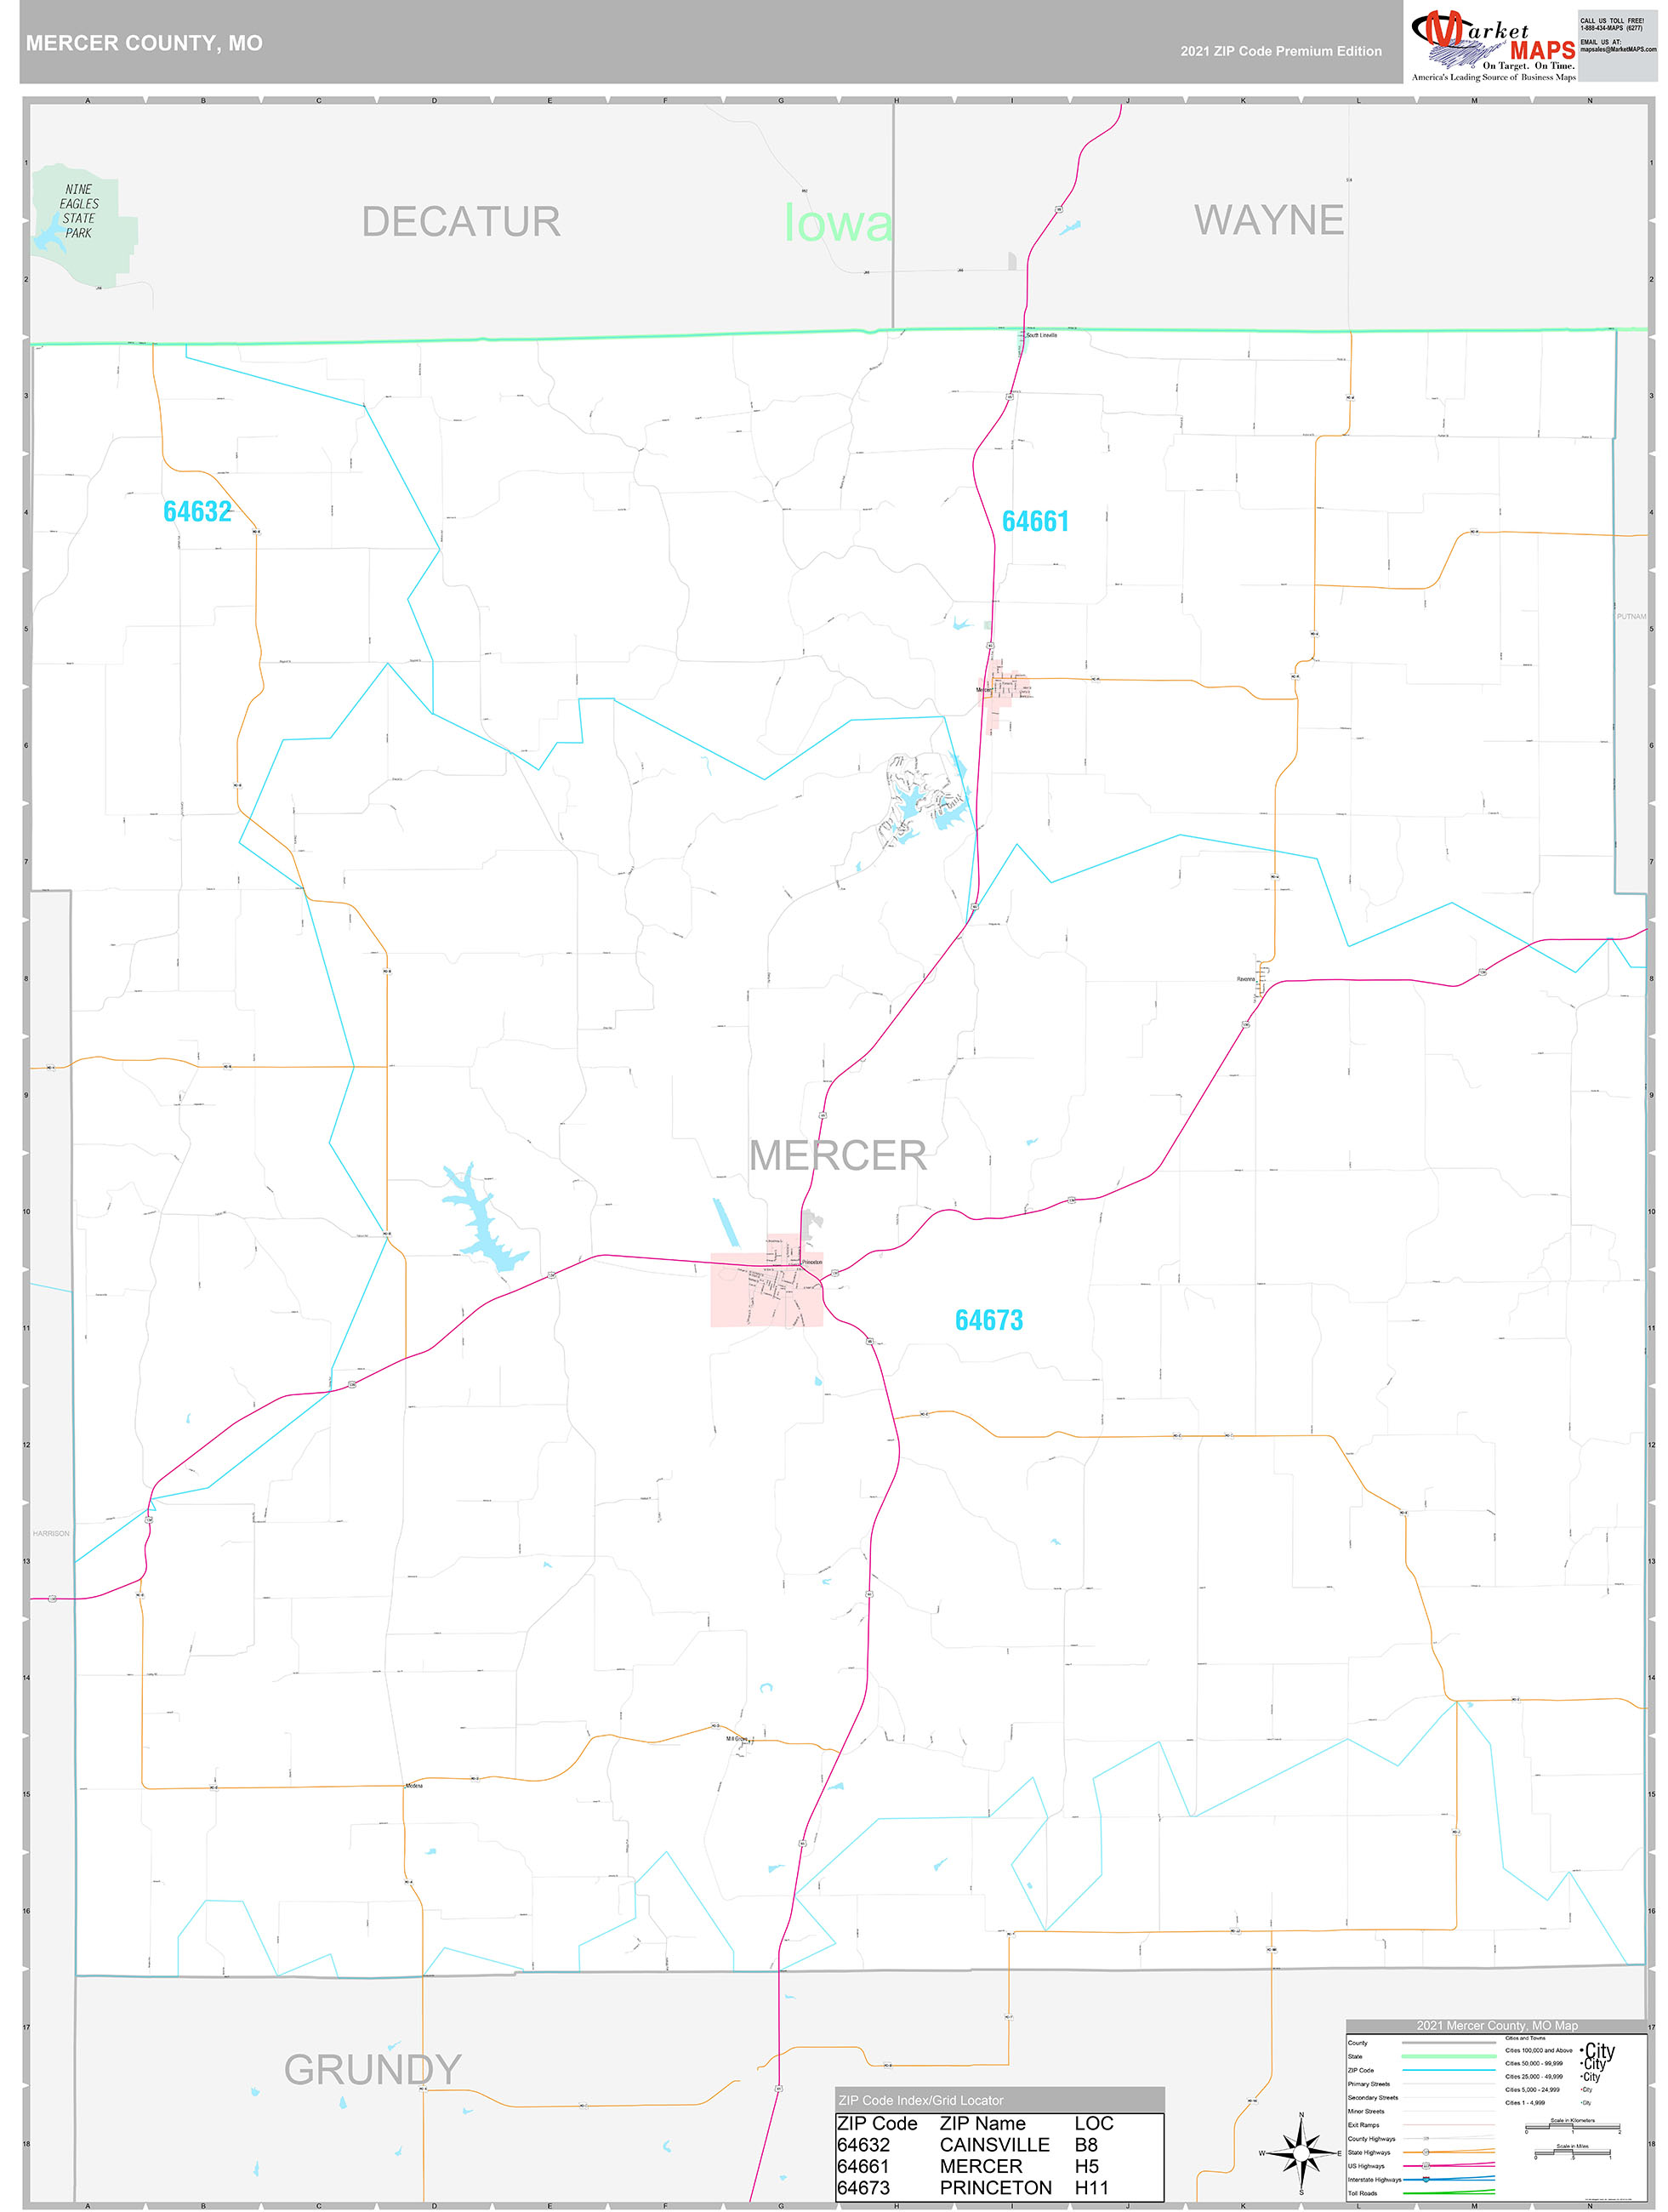 Mercer County Mo Wall Map Premium Style By Marketmaps Mapsales 2183